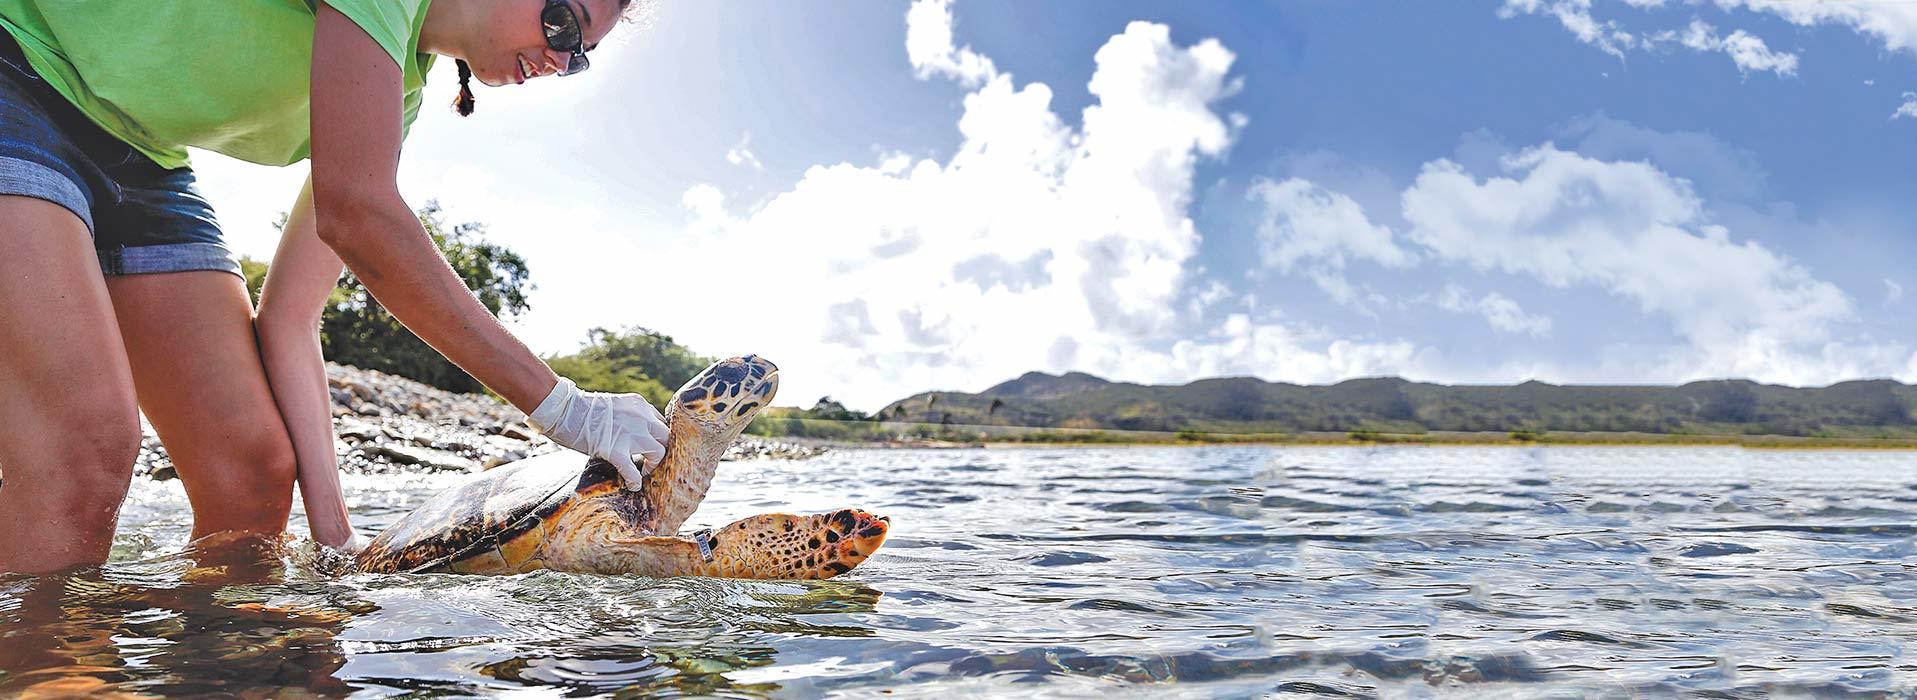 Student helps a sea turtle in the ocean